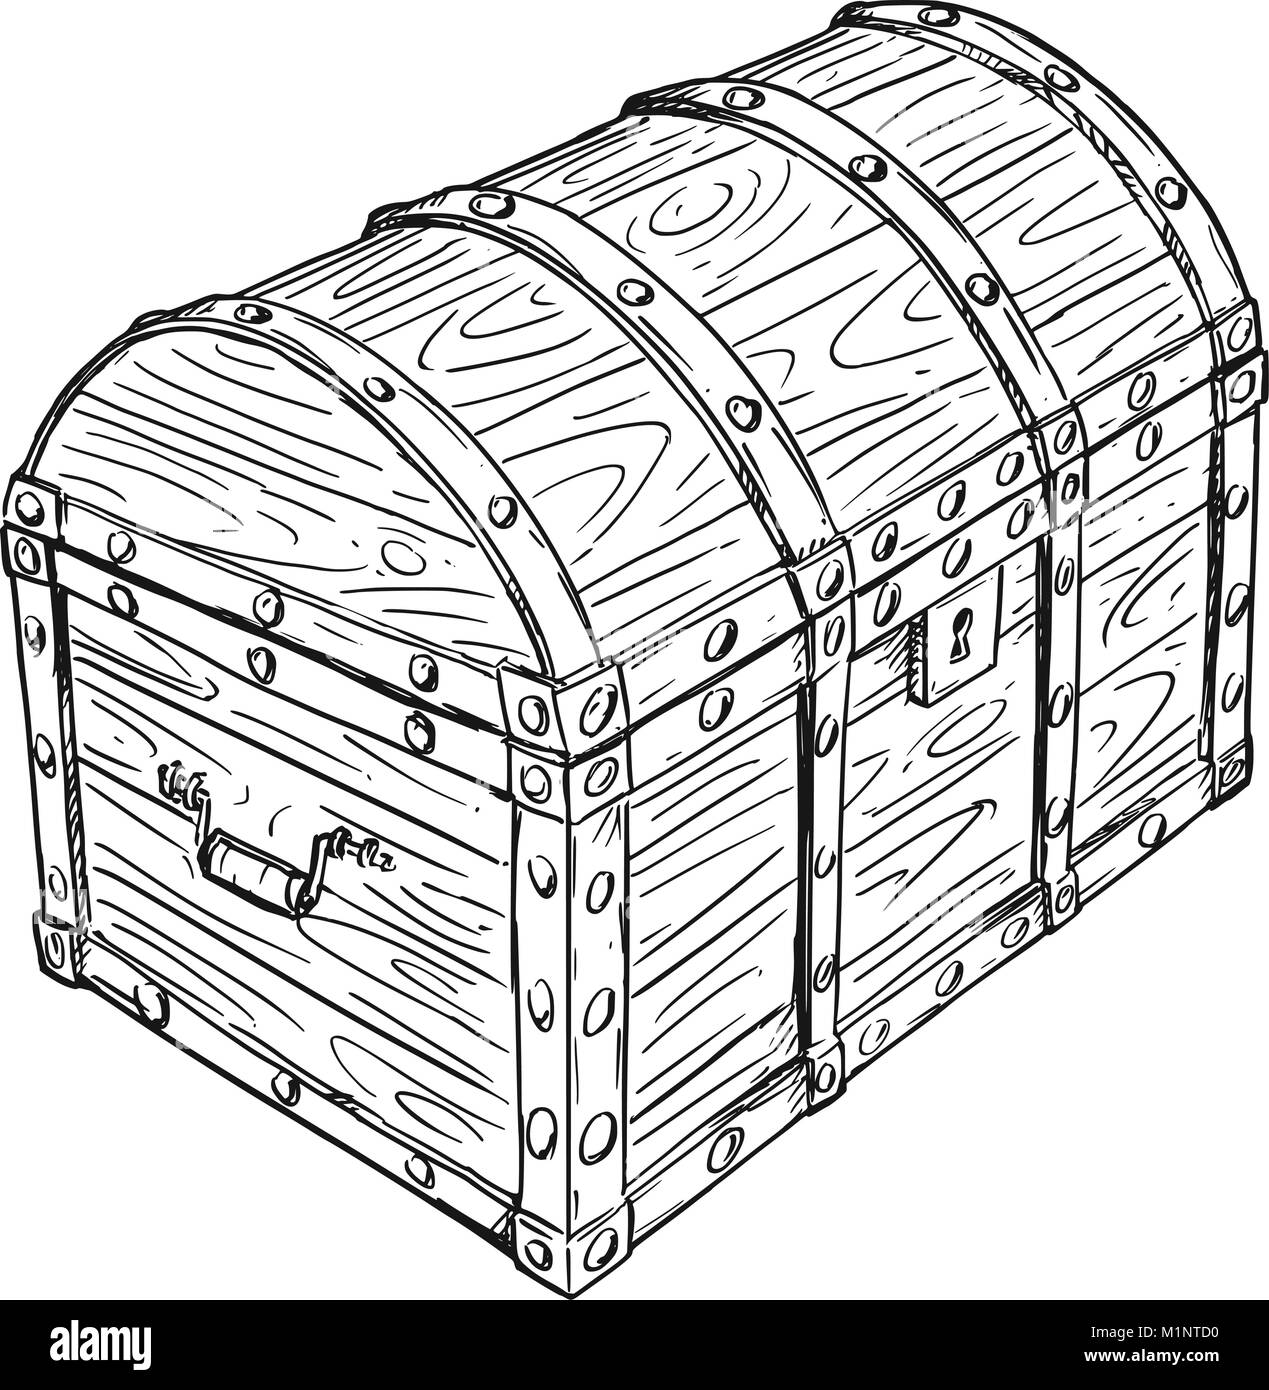 Cartoon Vector Drawing of Old Empty Closed or Locked Pirate Chest Stock Vector